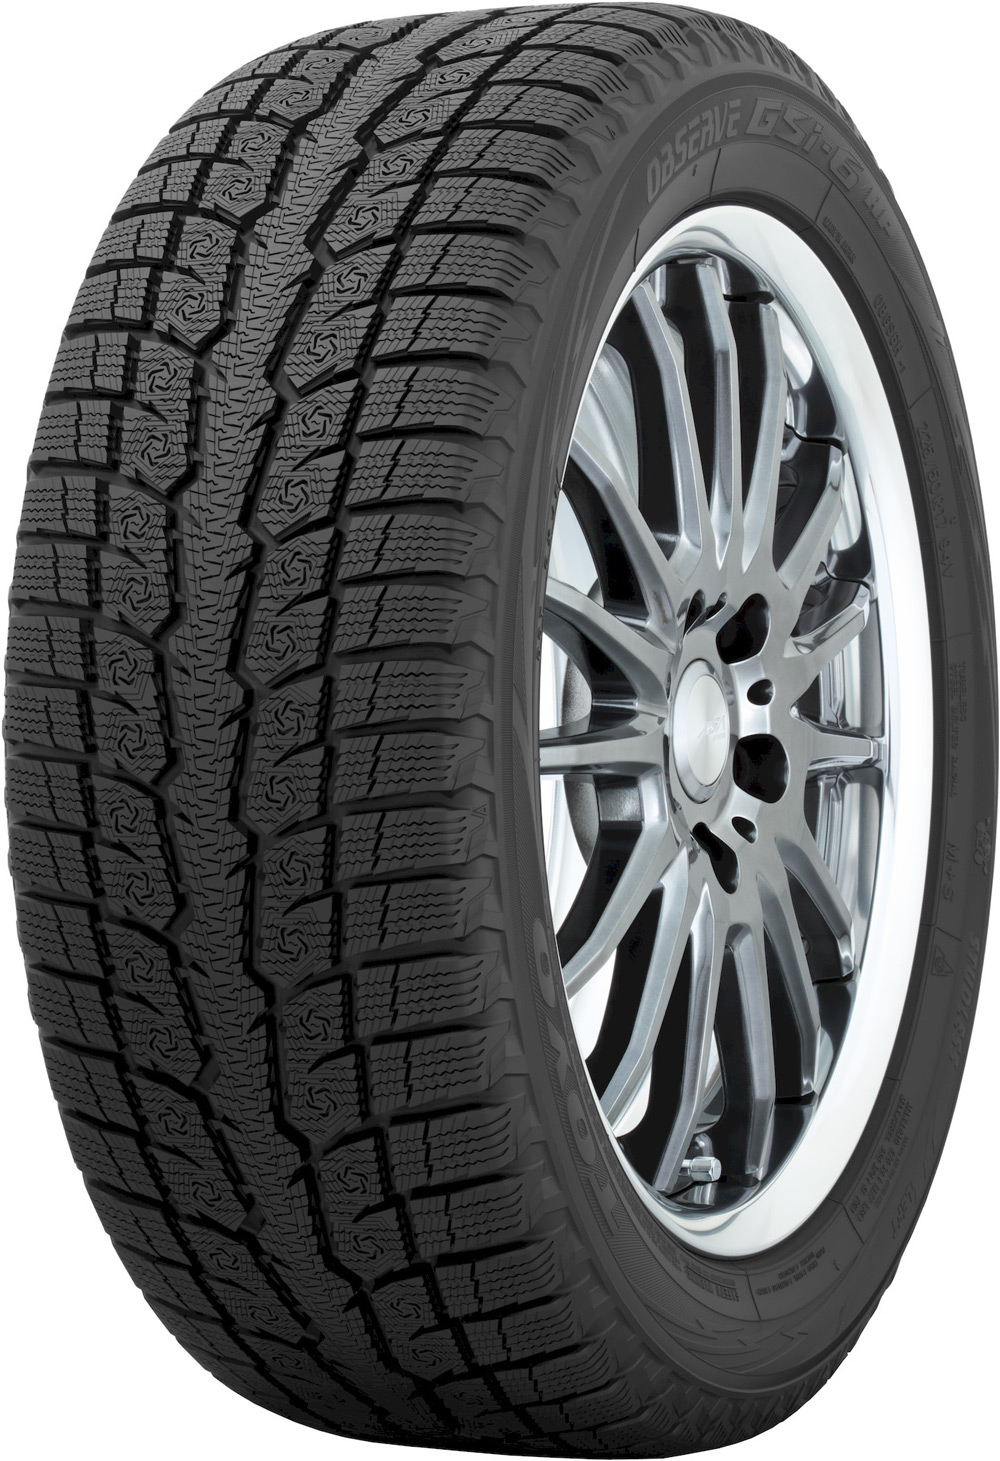 Anvelope auto TOYO OBSERVE GSI6 HP XL 235/45 R17 97H